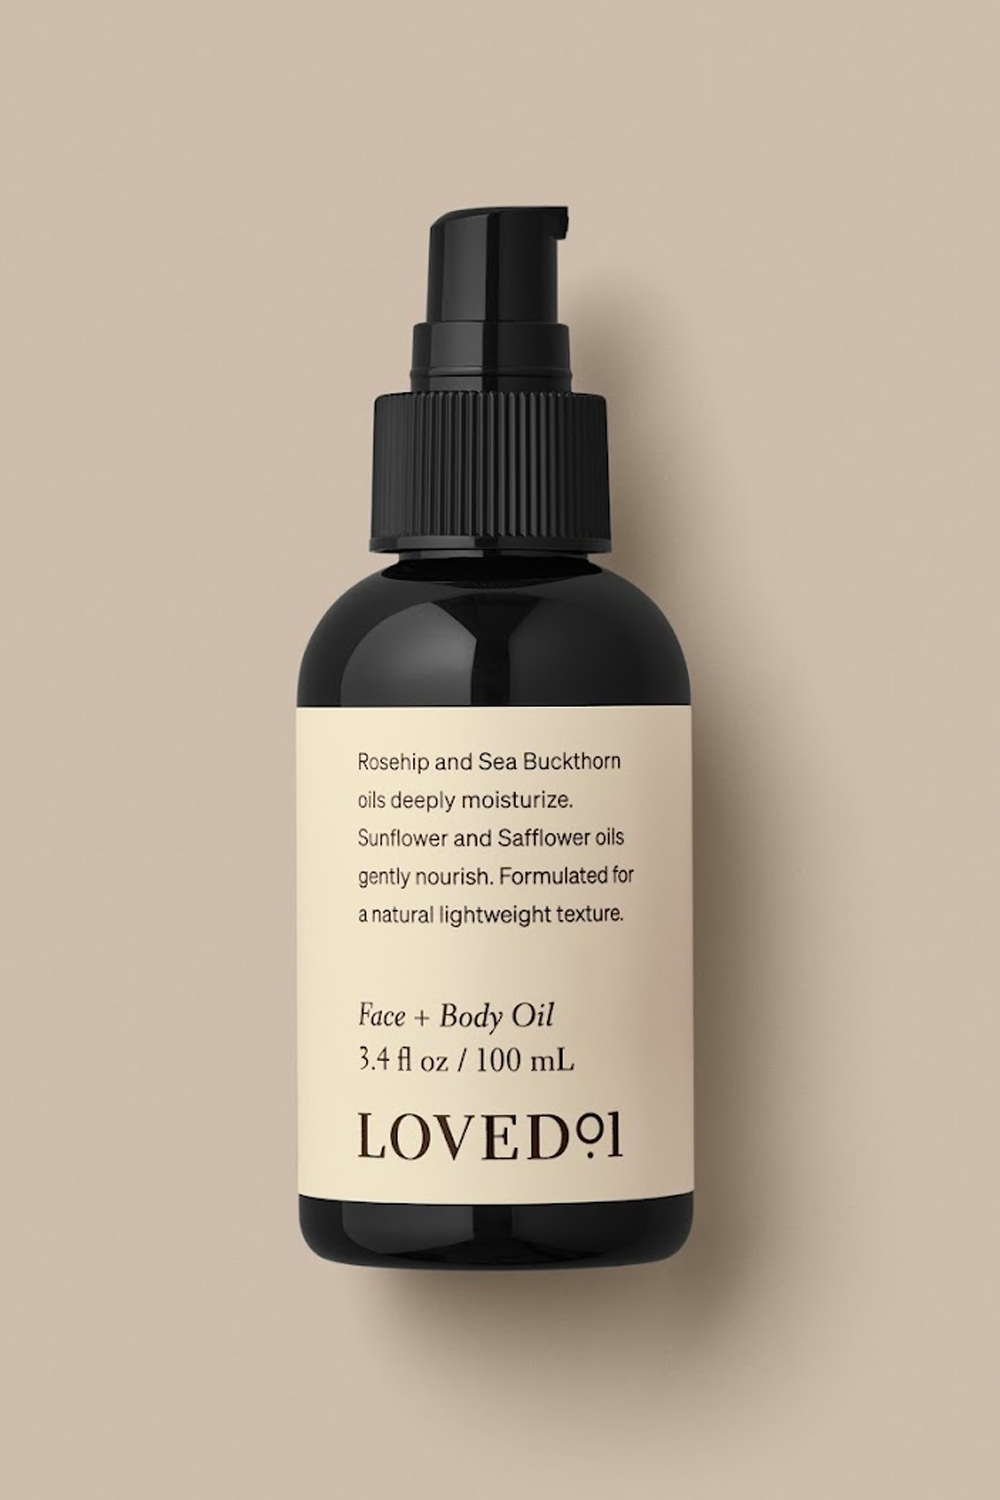 loved01 face and body oil